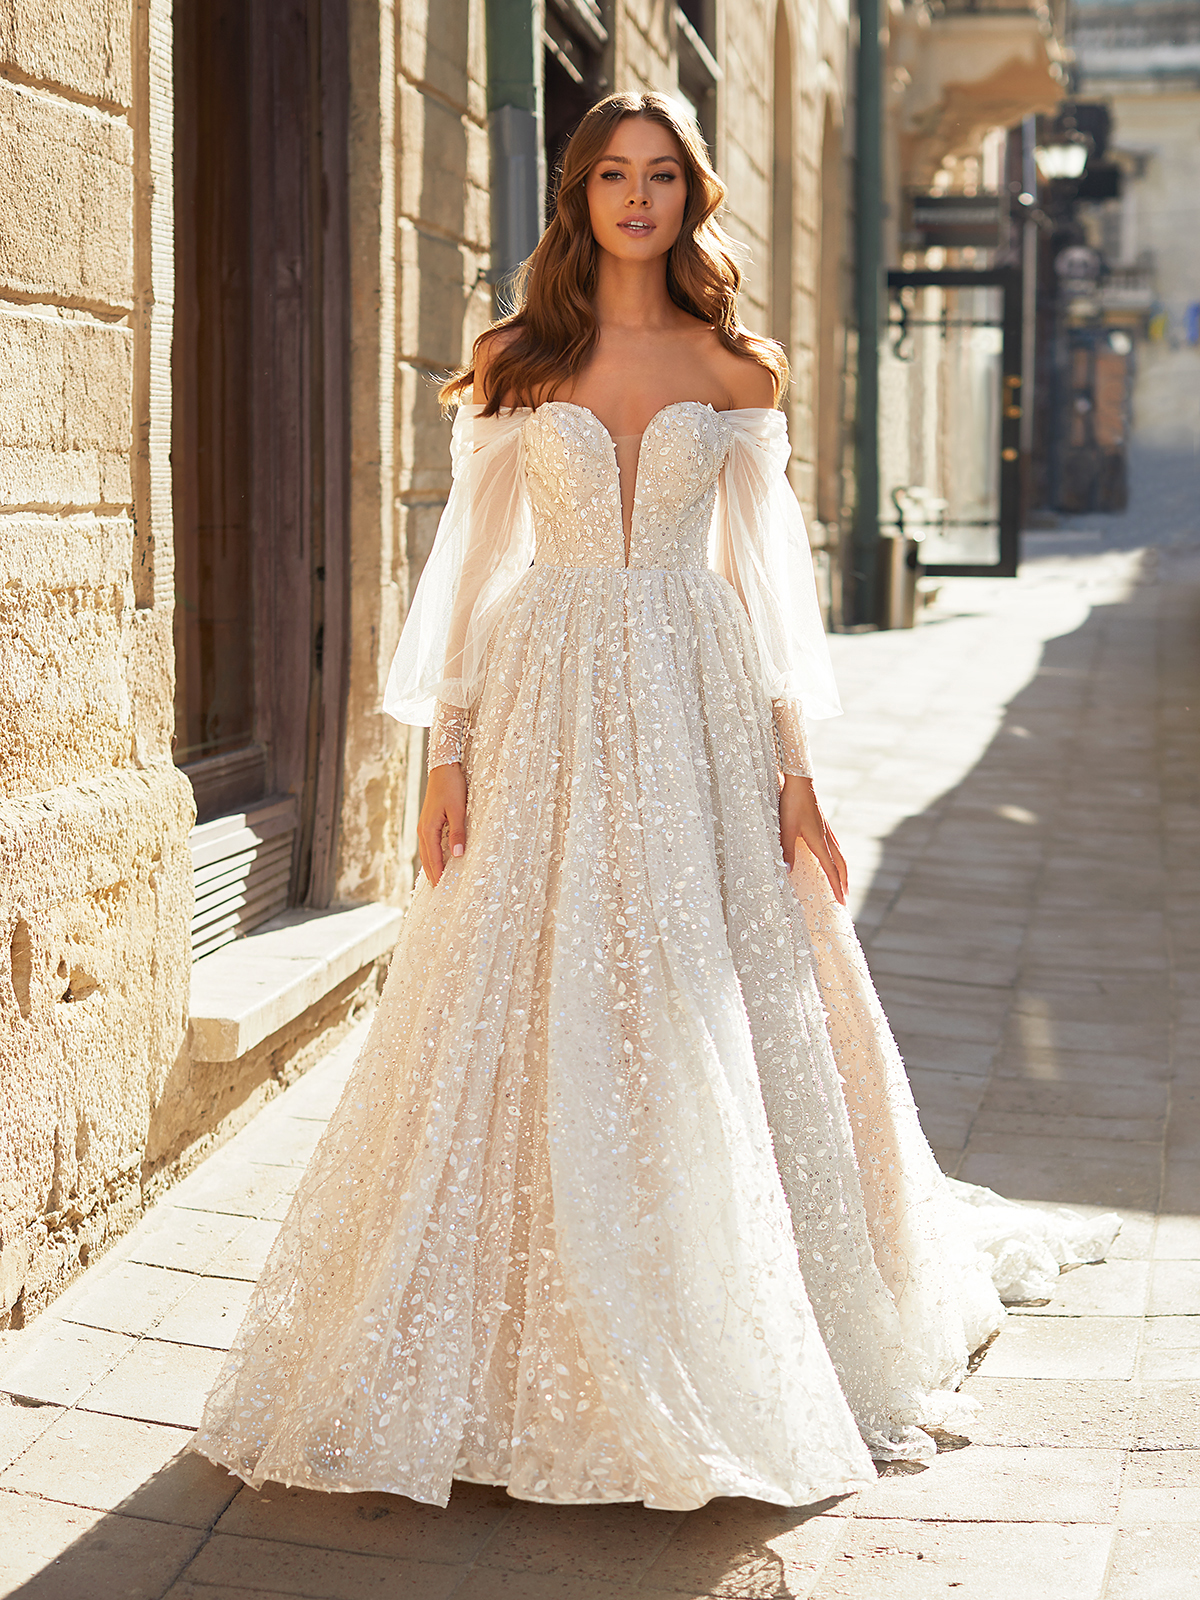 Bride wearing a wedding gown with detachable off the shoulder sleeves